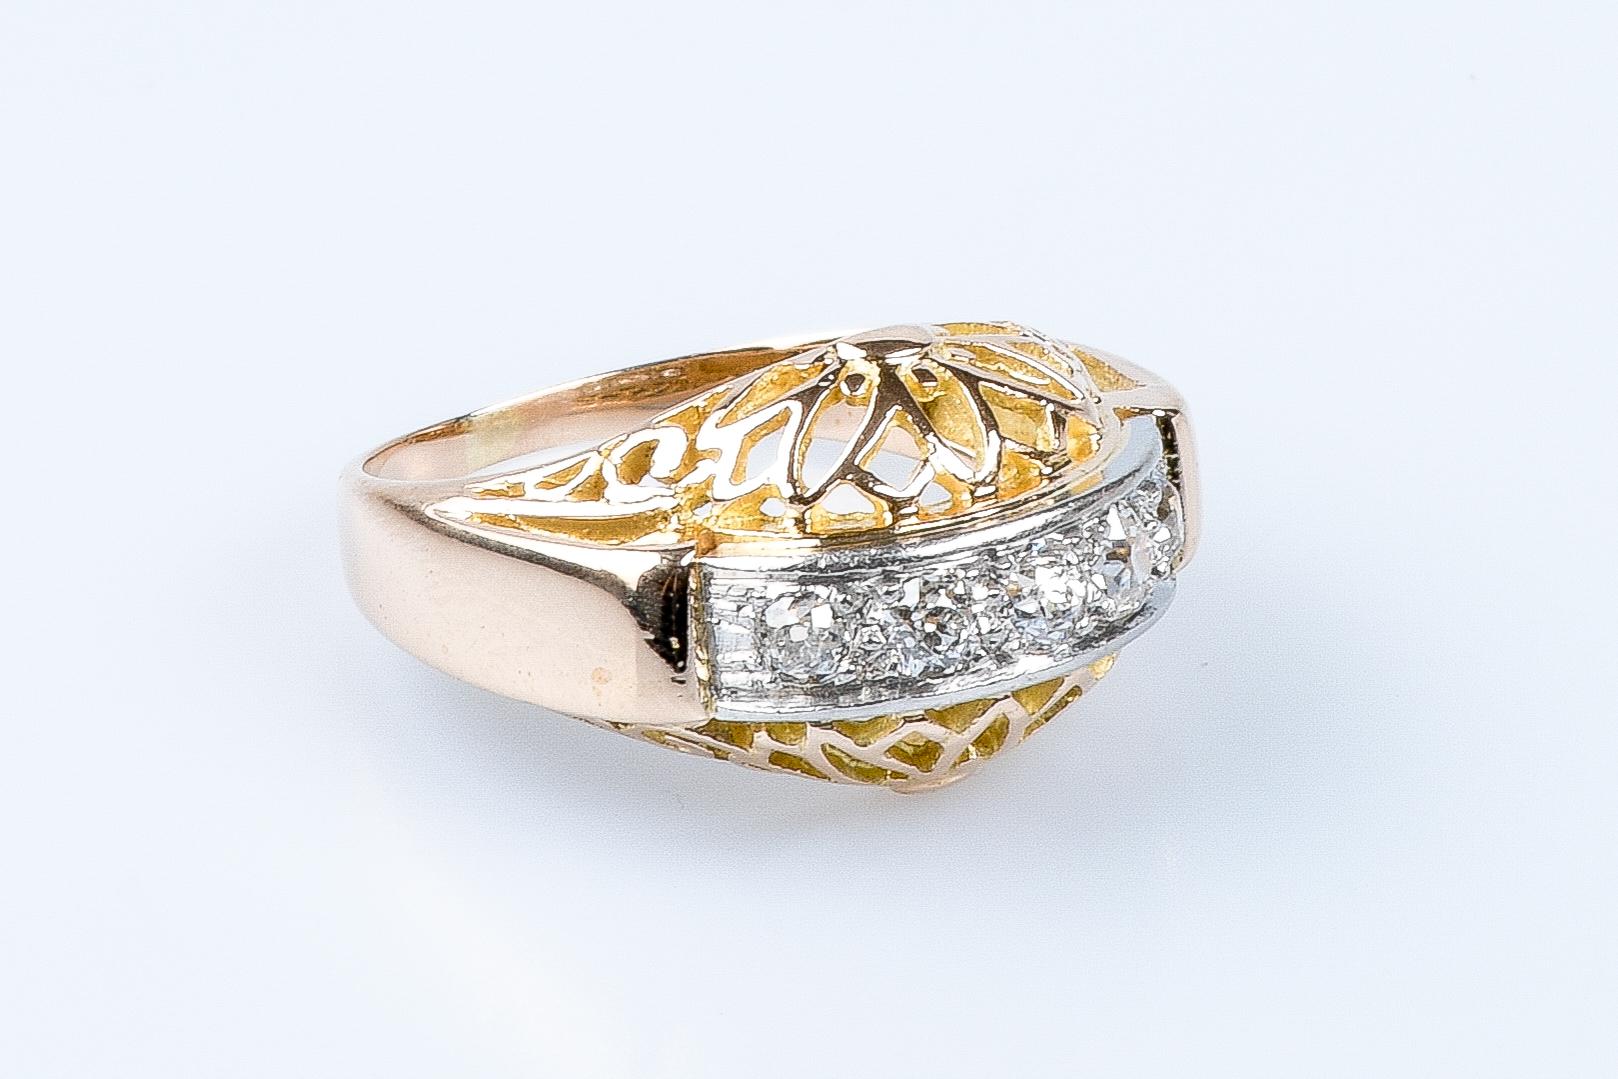 For Sale:  18 carat yellow and white gold ring designed with 5 round brillant cut diamonds 4